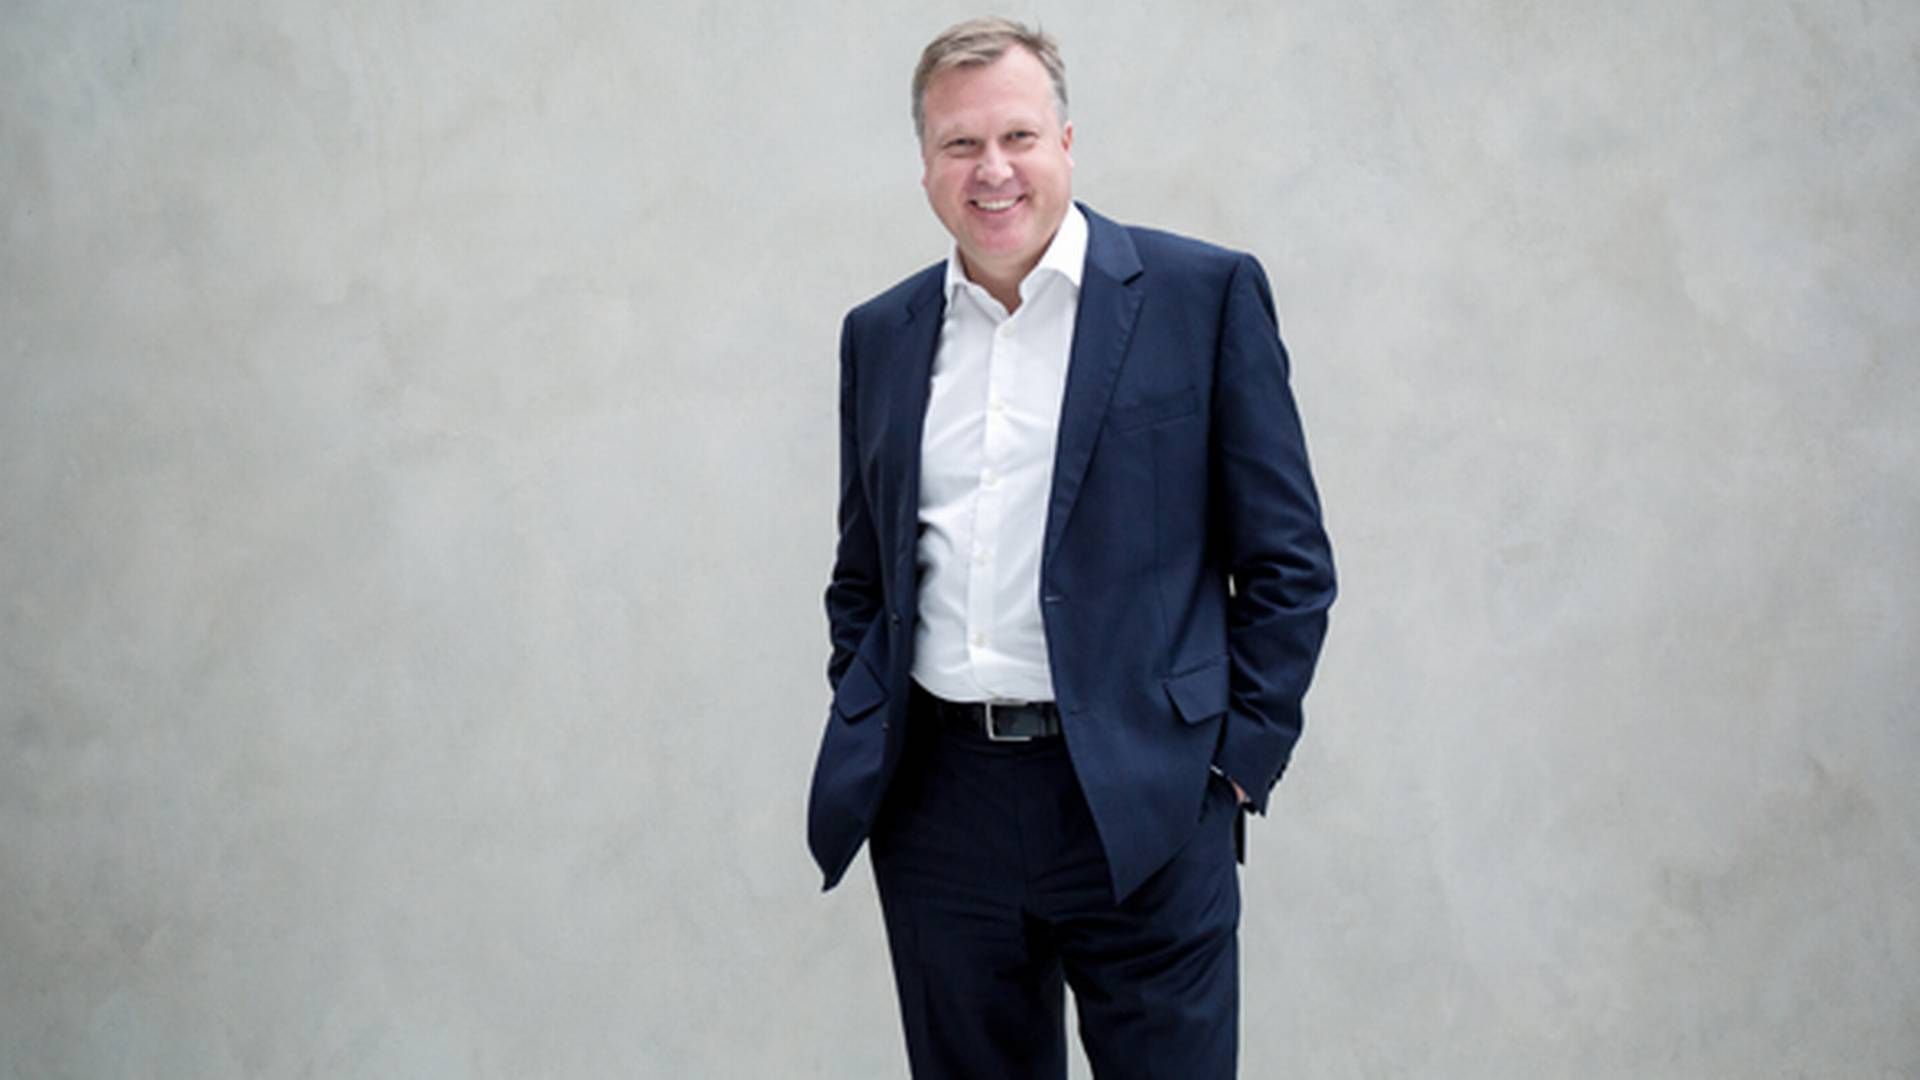 Joachim Høegh-Krohn joined Argentum Asset Management as CEO in 2006. He has previously held positions as CEO and Chief Investment Officer at DNB Asset Management. | Photo: PR Argentum Asset Management